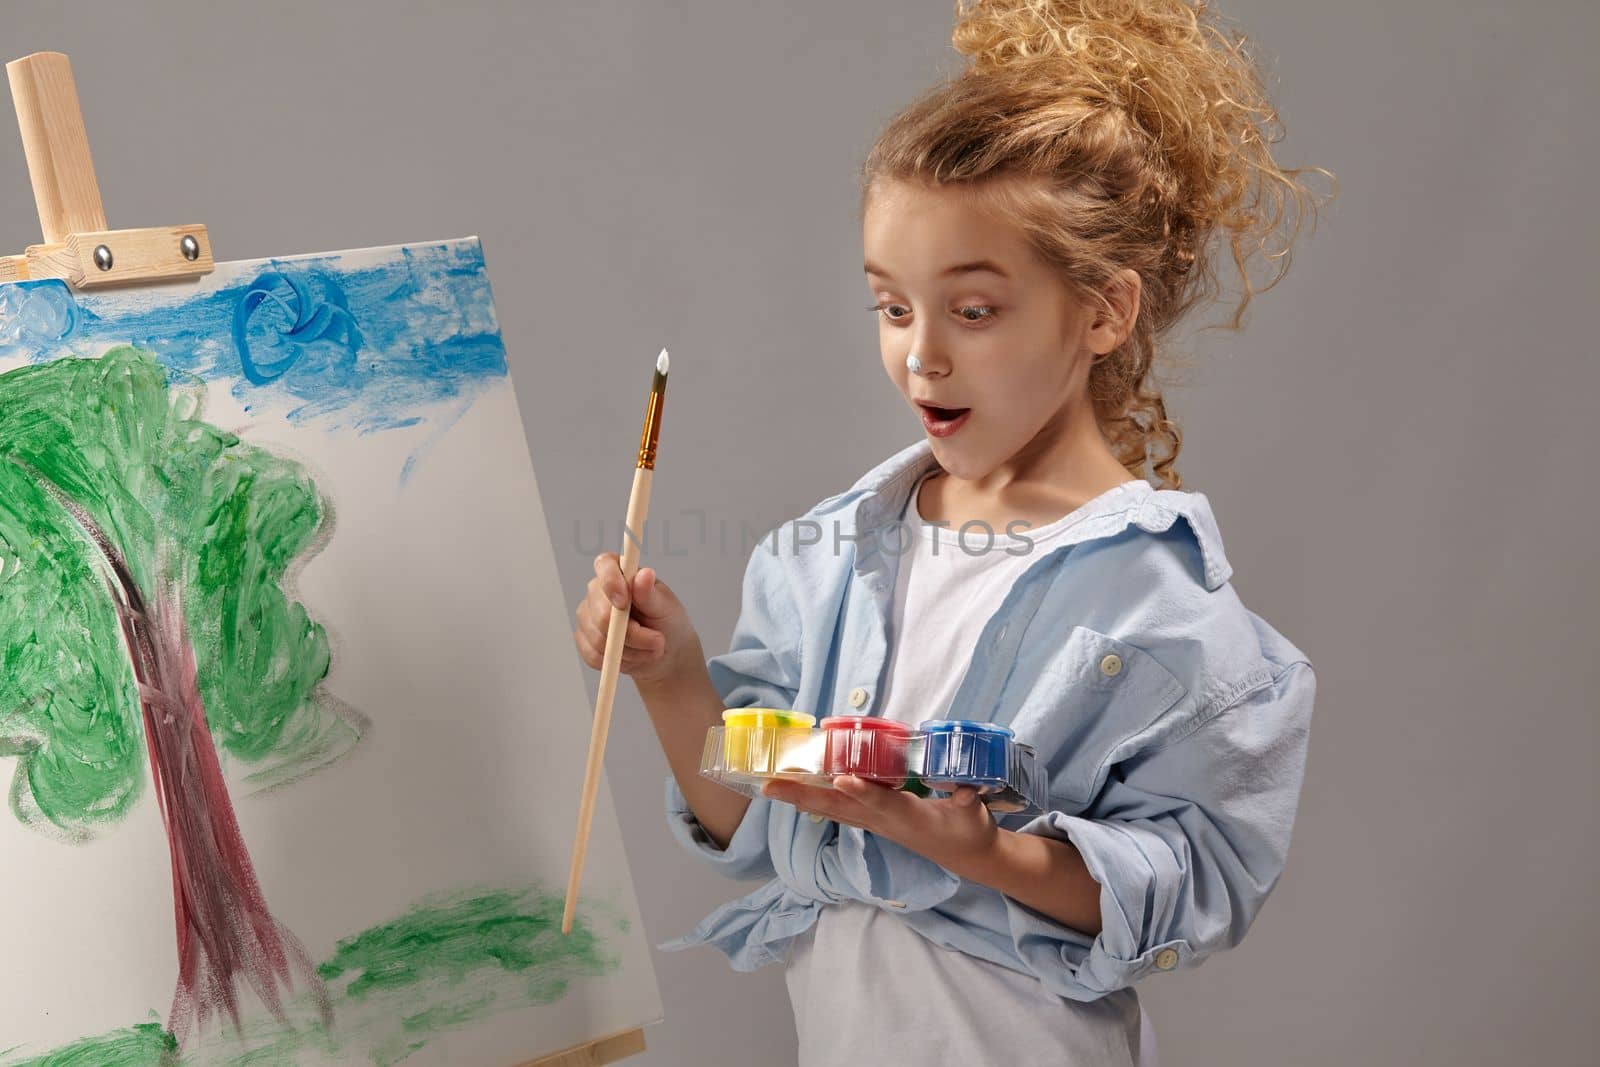 Talanted school girl whith a curly blond hair, wearing in a blue shirt and white t-shirt is painting with a watercolor brush on an easel, looking wondered and standing on a gray background.